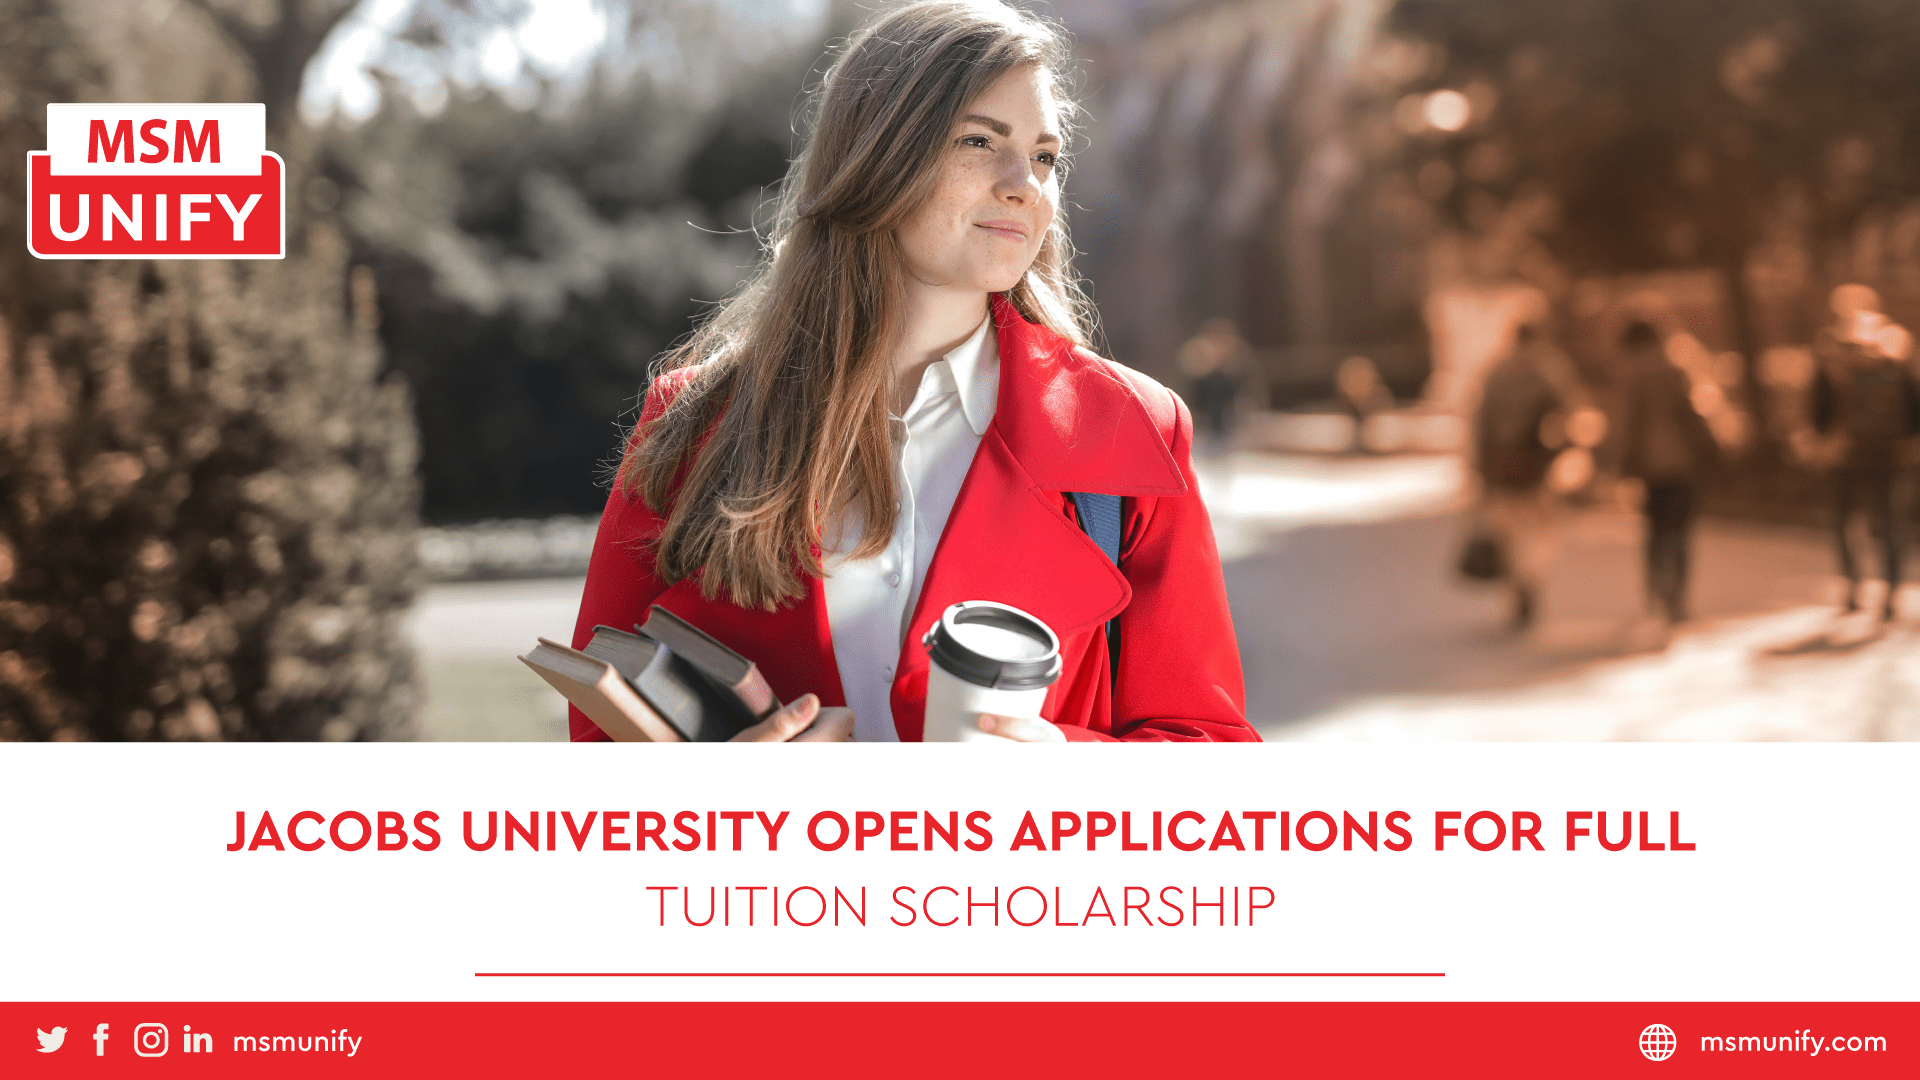 MSM Unify Jacobs University Opens Applications For Full Tuition Scholarships min